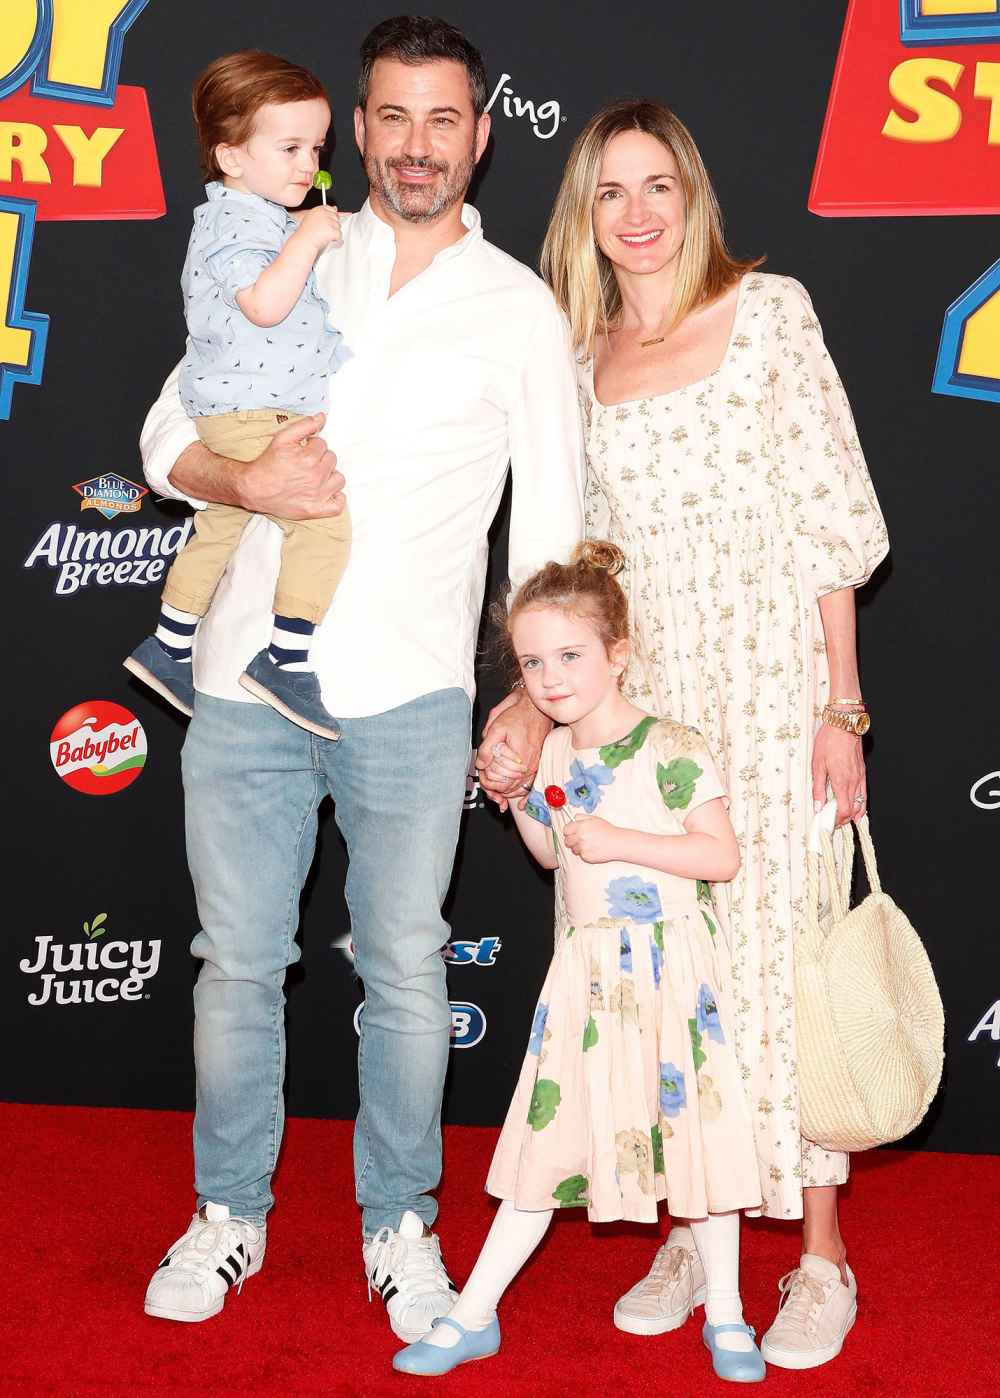 Jimmy Kimmel Molly McNearney Billy and Jane Jimmy Kimmel Describes Hour-Long Standoff With 5-Year-Old Daughter Over Disgusting Pancakes